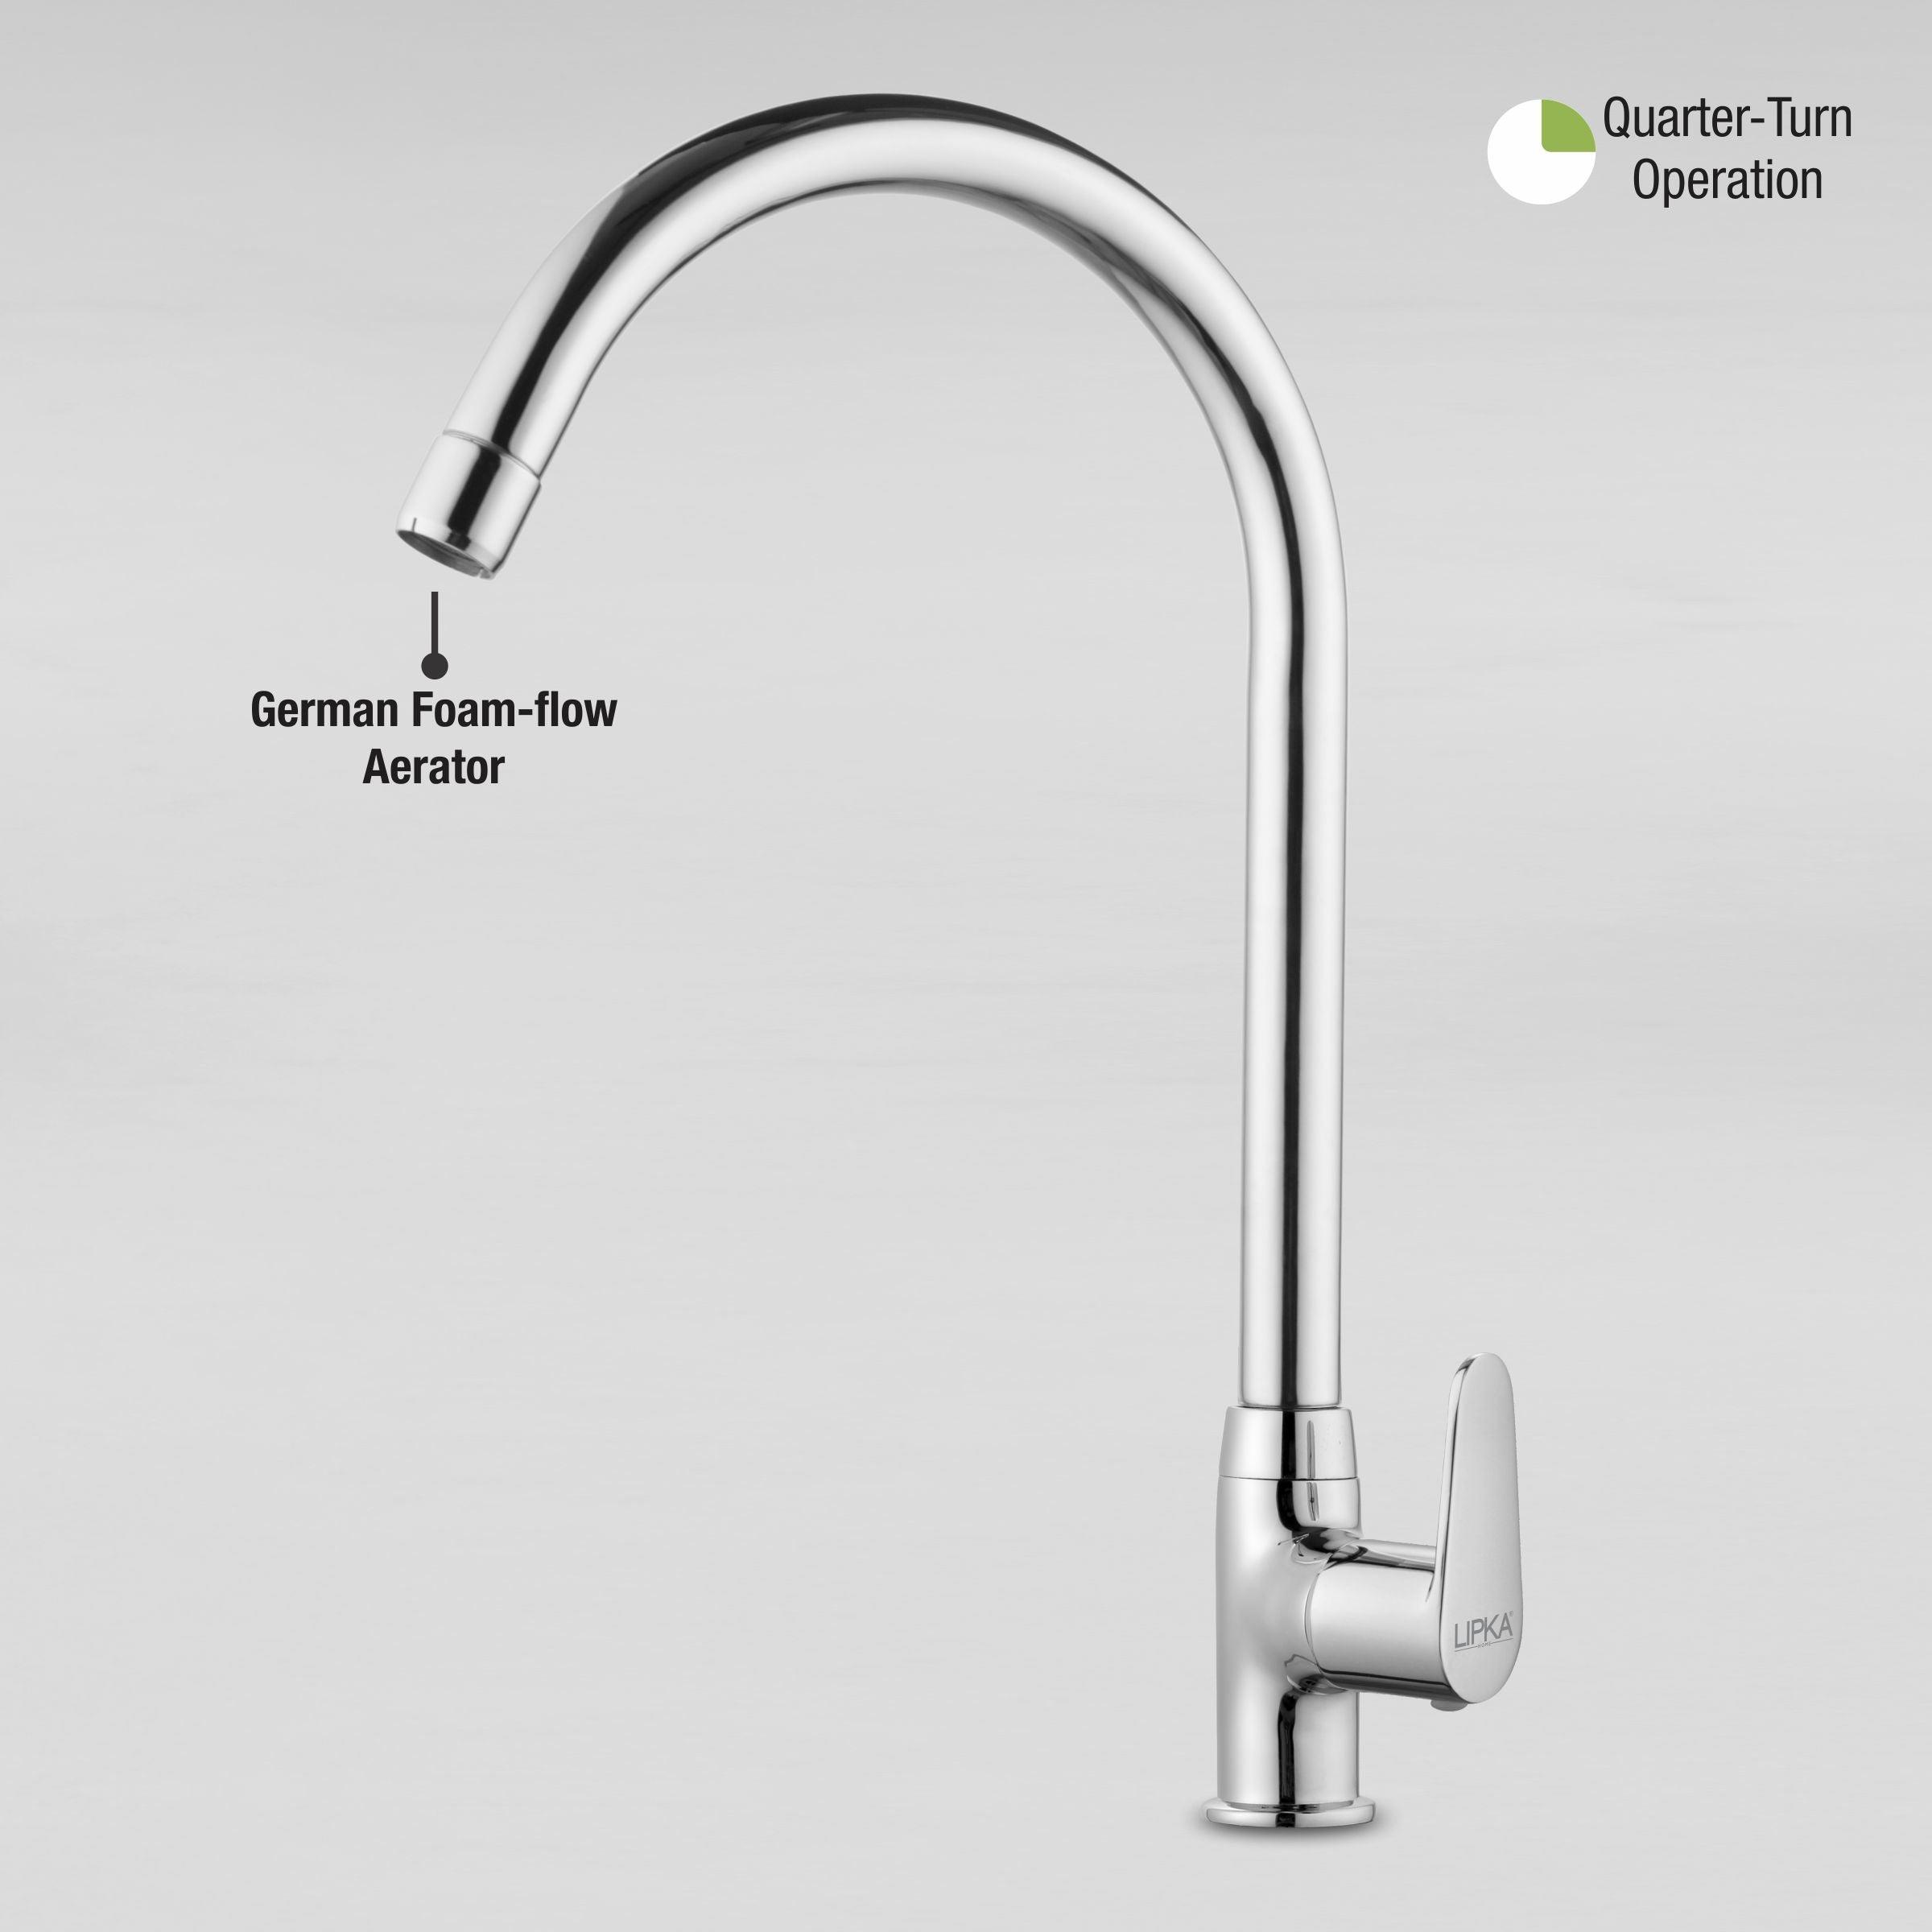 Virgo Swan Neck with Large (20 Inches) Round Swivel Spout Faucet with quarter turn operation